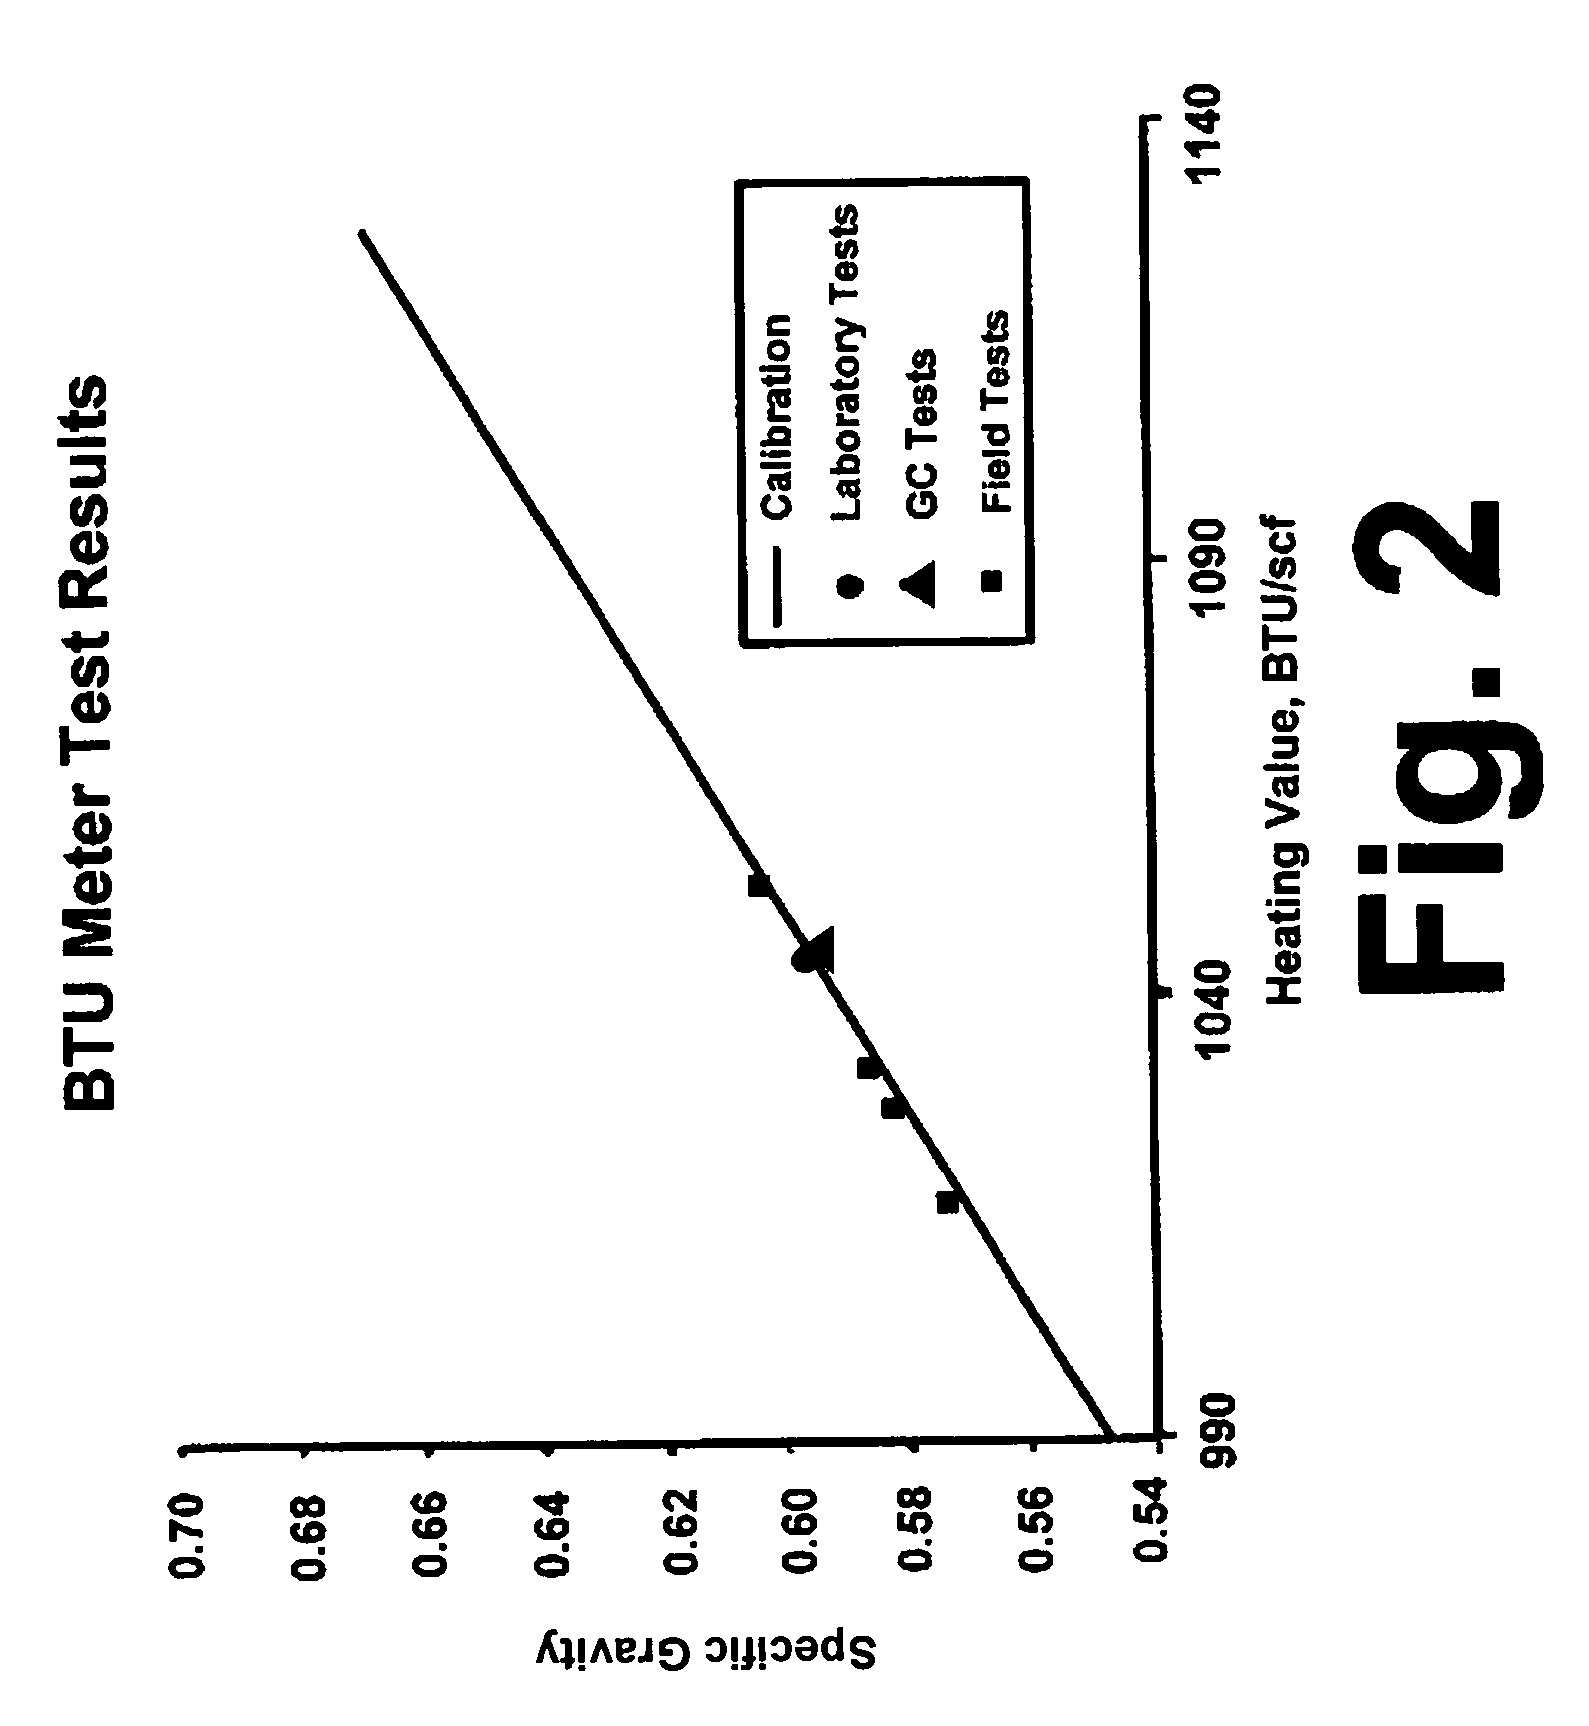 Apparatus and method for accurate, real-time measurement of pipeline gas